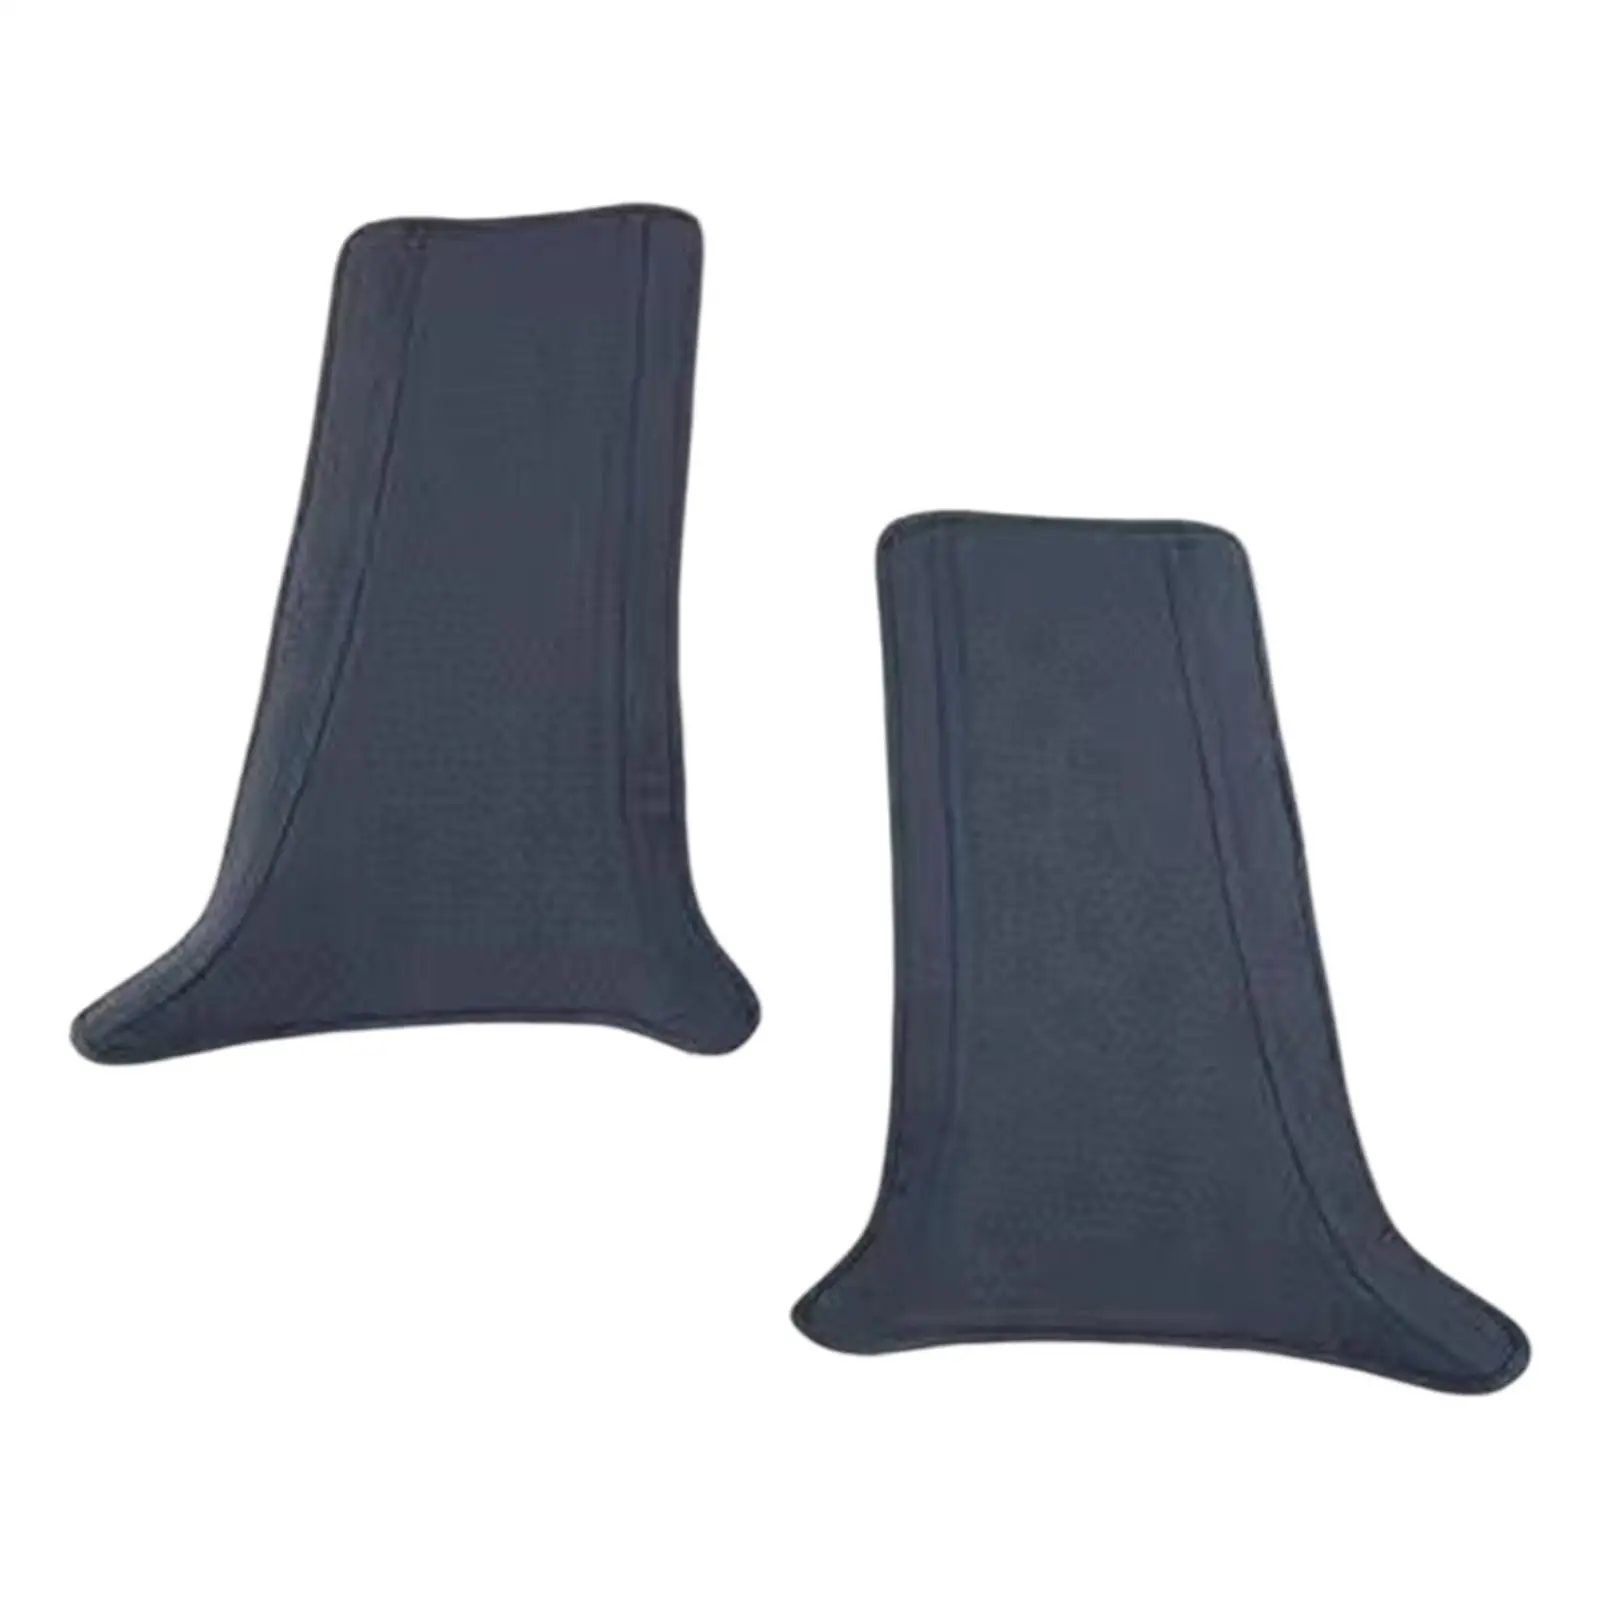 Durable kick Mats pad Replaces Anti Kicking Artificial Leather Vehicle Waterproof for Atto 3 Accessories